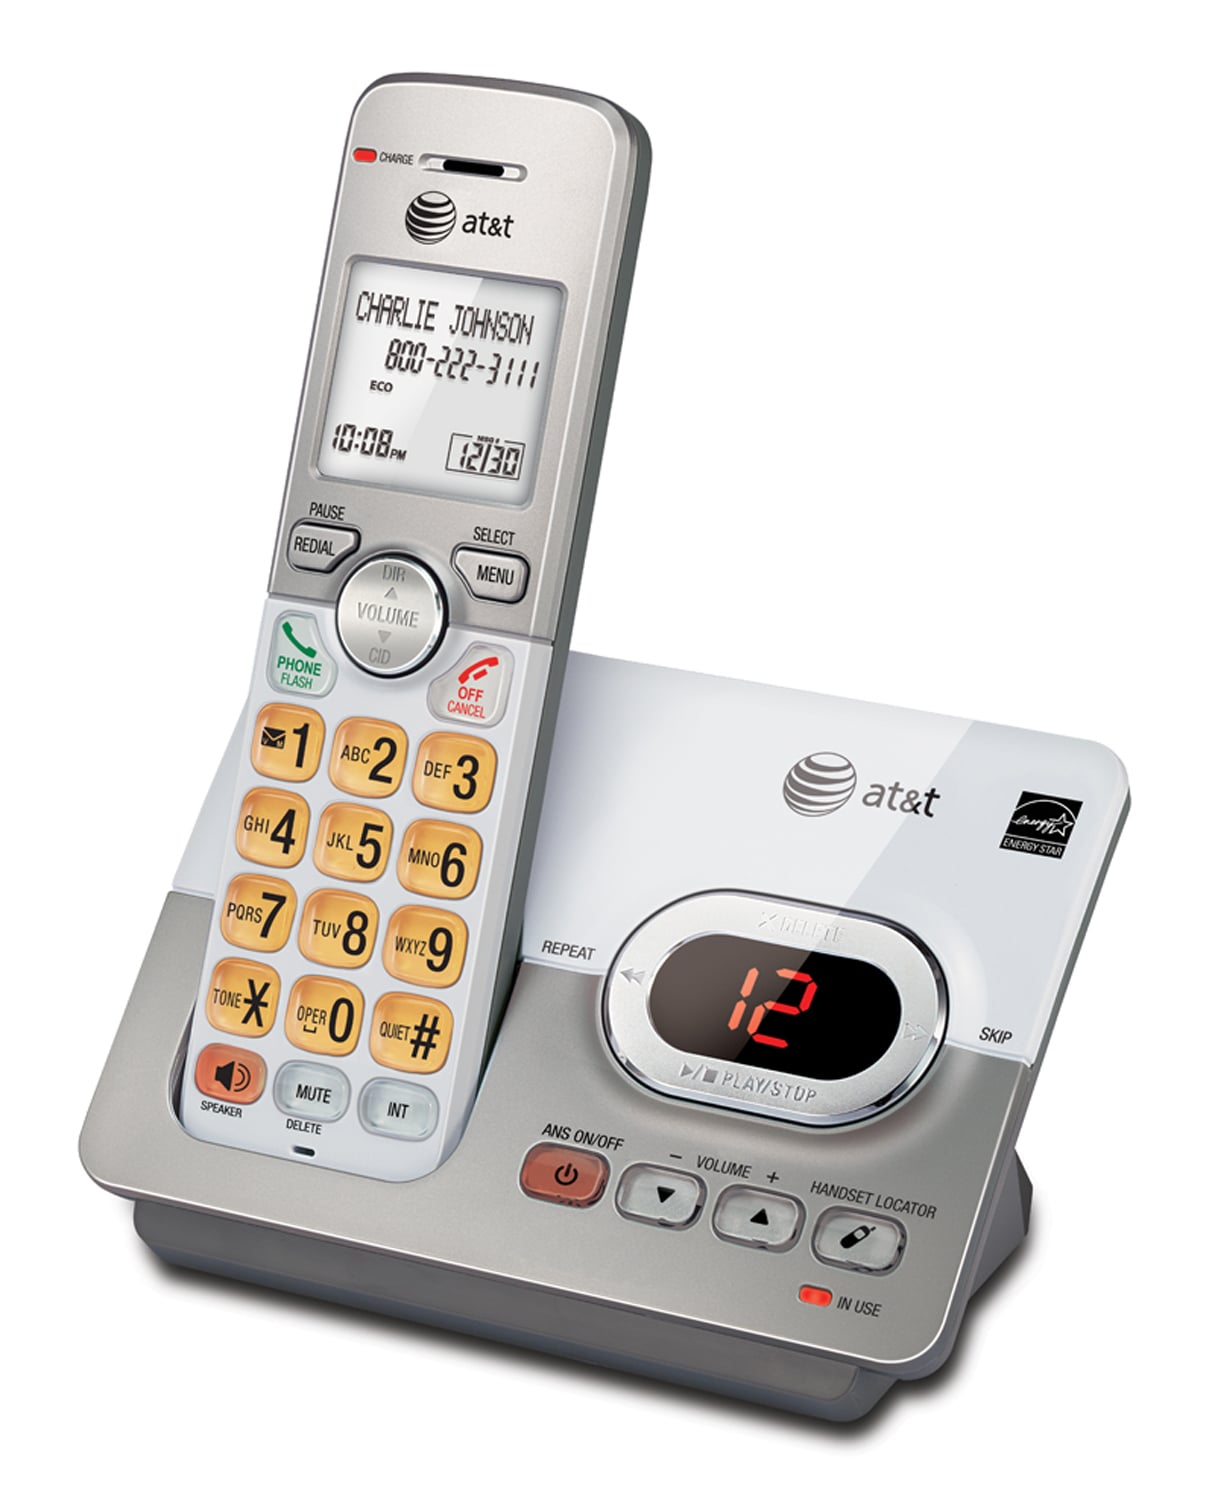 Cordless phone system with caller ID/call waiting - view 3